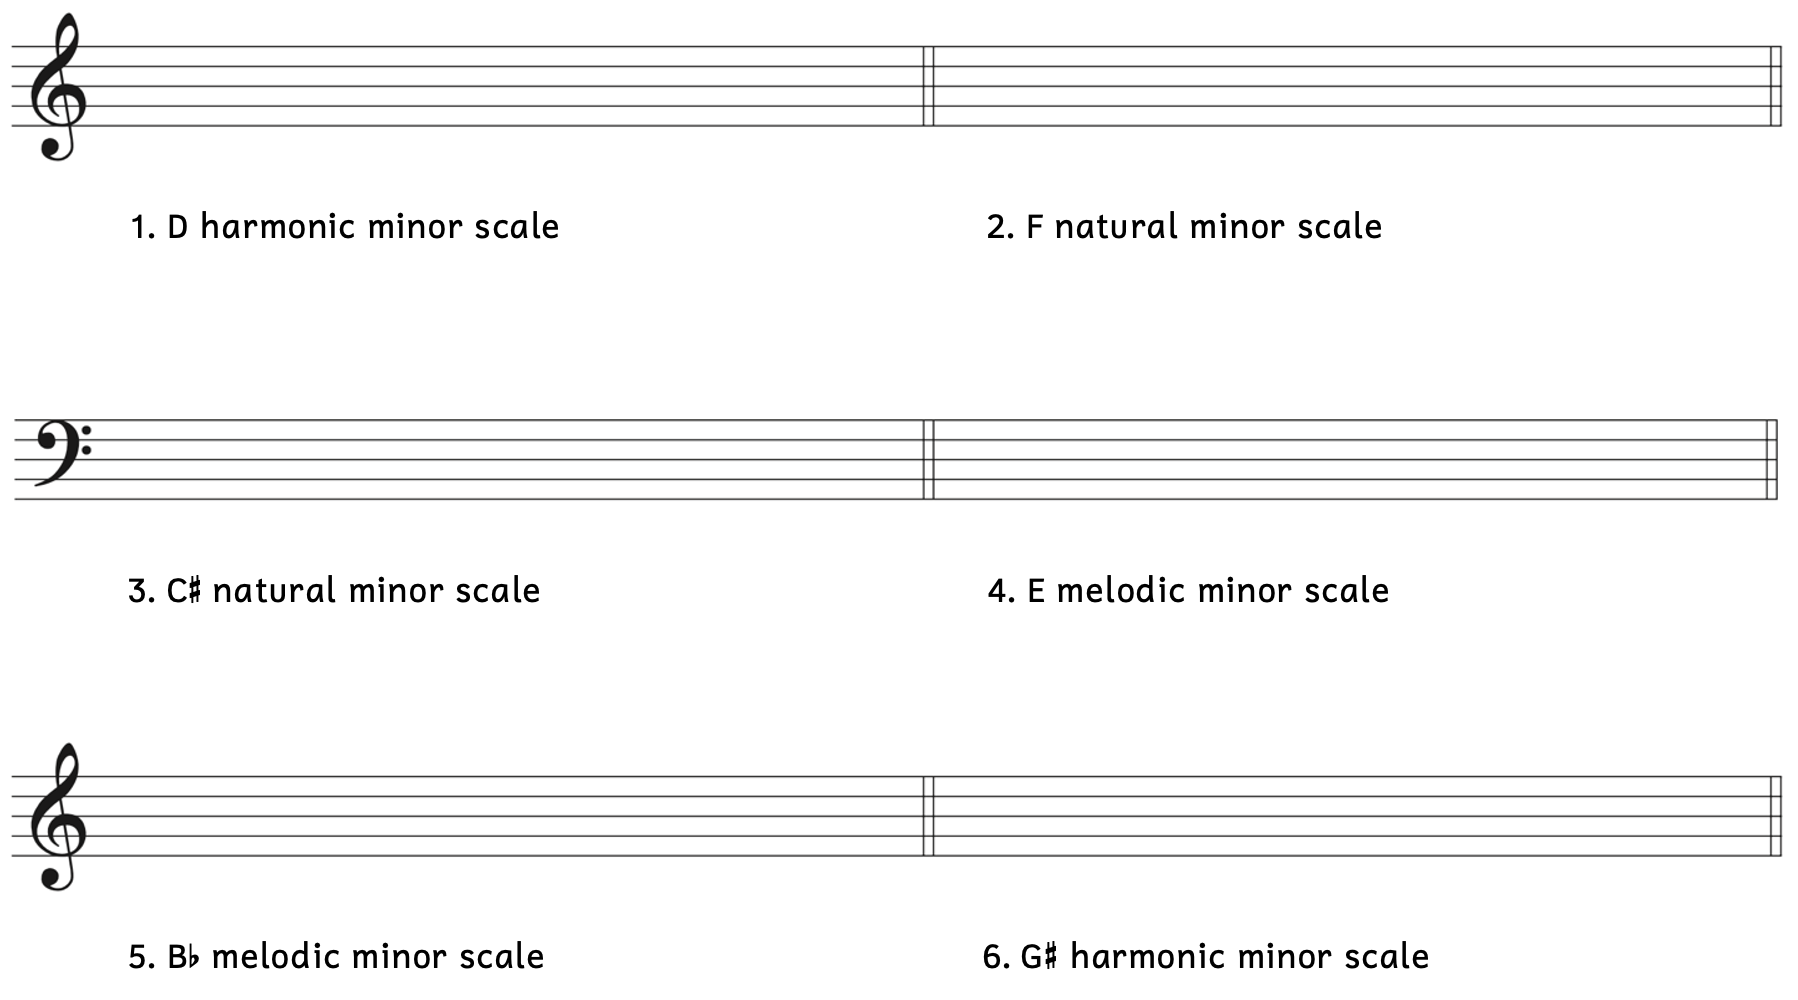 Number 1, D harmonic minor scale in treble clef. Number 2, F natural minor scale in treble clef. Number 3, C-sharp natural minor scale in bass clef. Number 4, E melodic minor scale in bass clef. Number 5, B-flat melodic minor scale in treble clef. Number 6, G-sharp harmonic minor scale in treble clef.